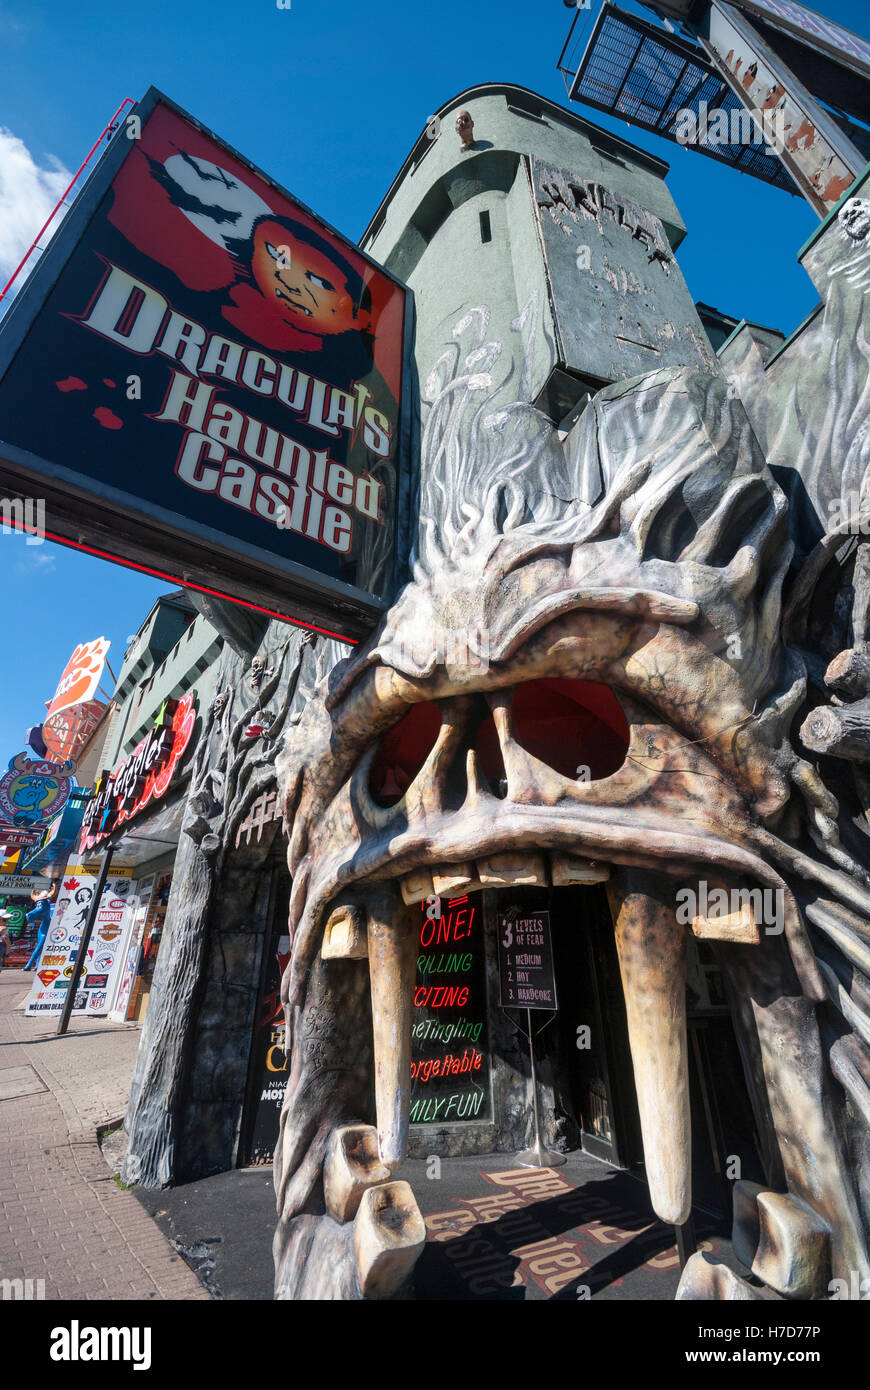 Dracula's Haunted Castle on Clifton hill, an area of Niagara Falls Canada known for its strange and tacky tourist attractions Stock Photo